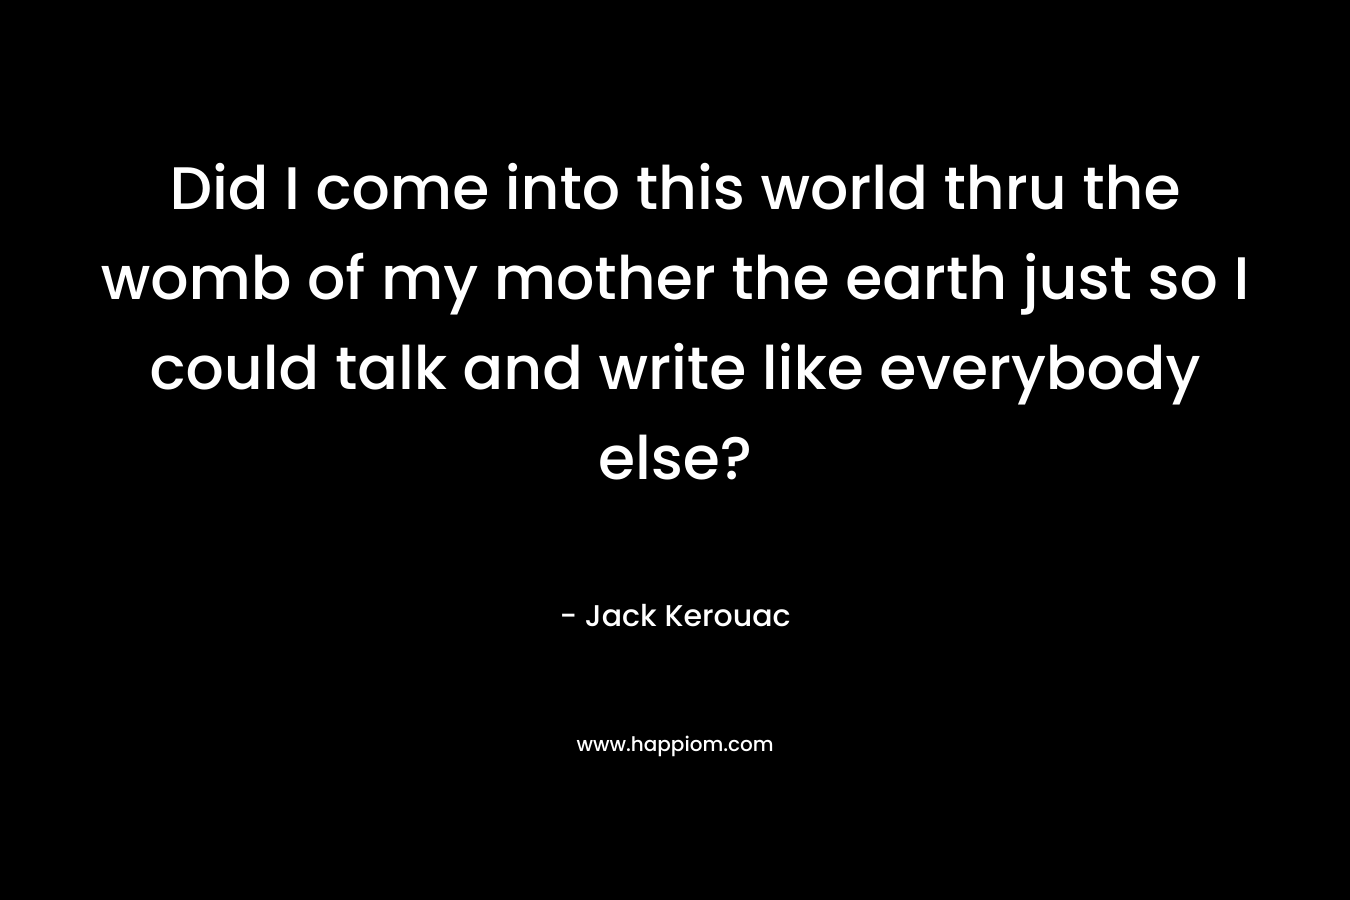 Did I come into this world thru the womb of my mother the earth just so I could talk and write like everybody else? – Jack Kerouac